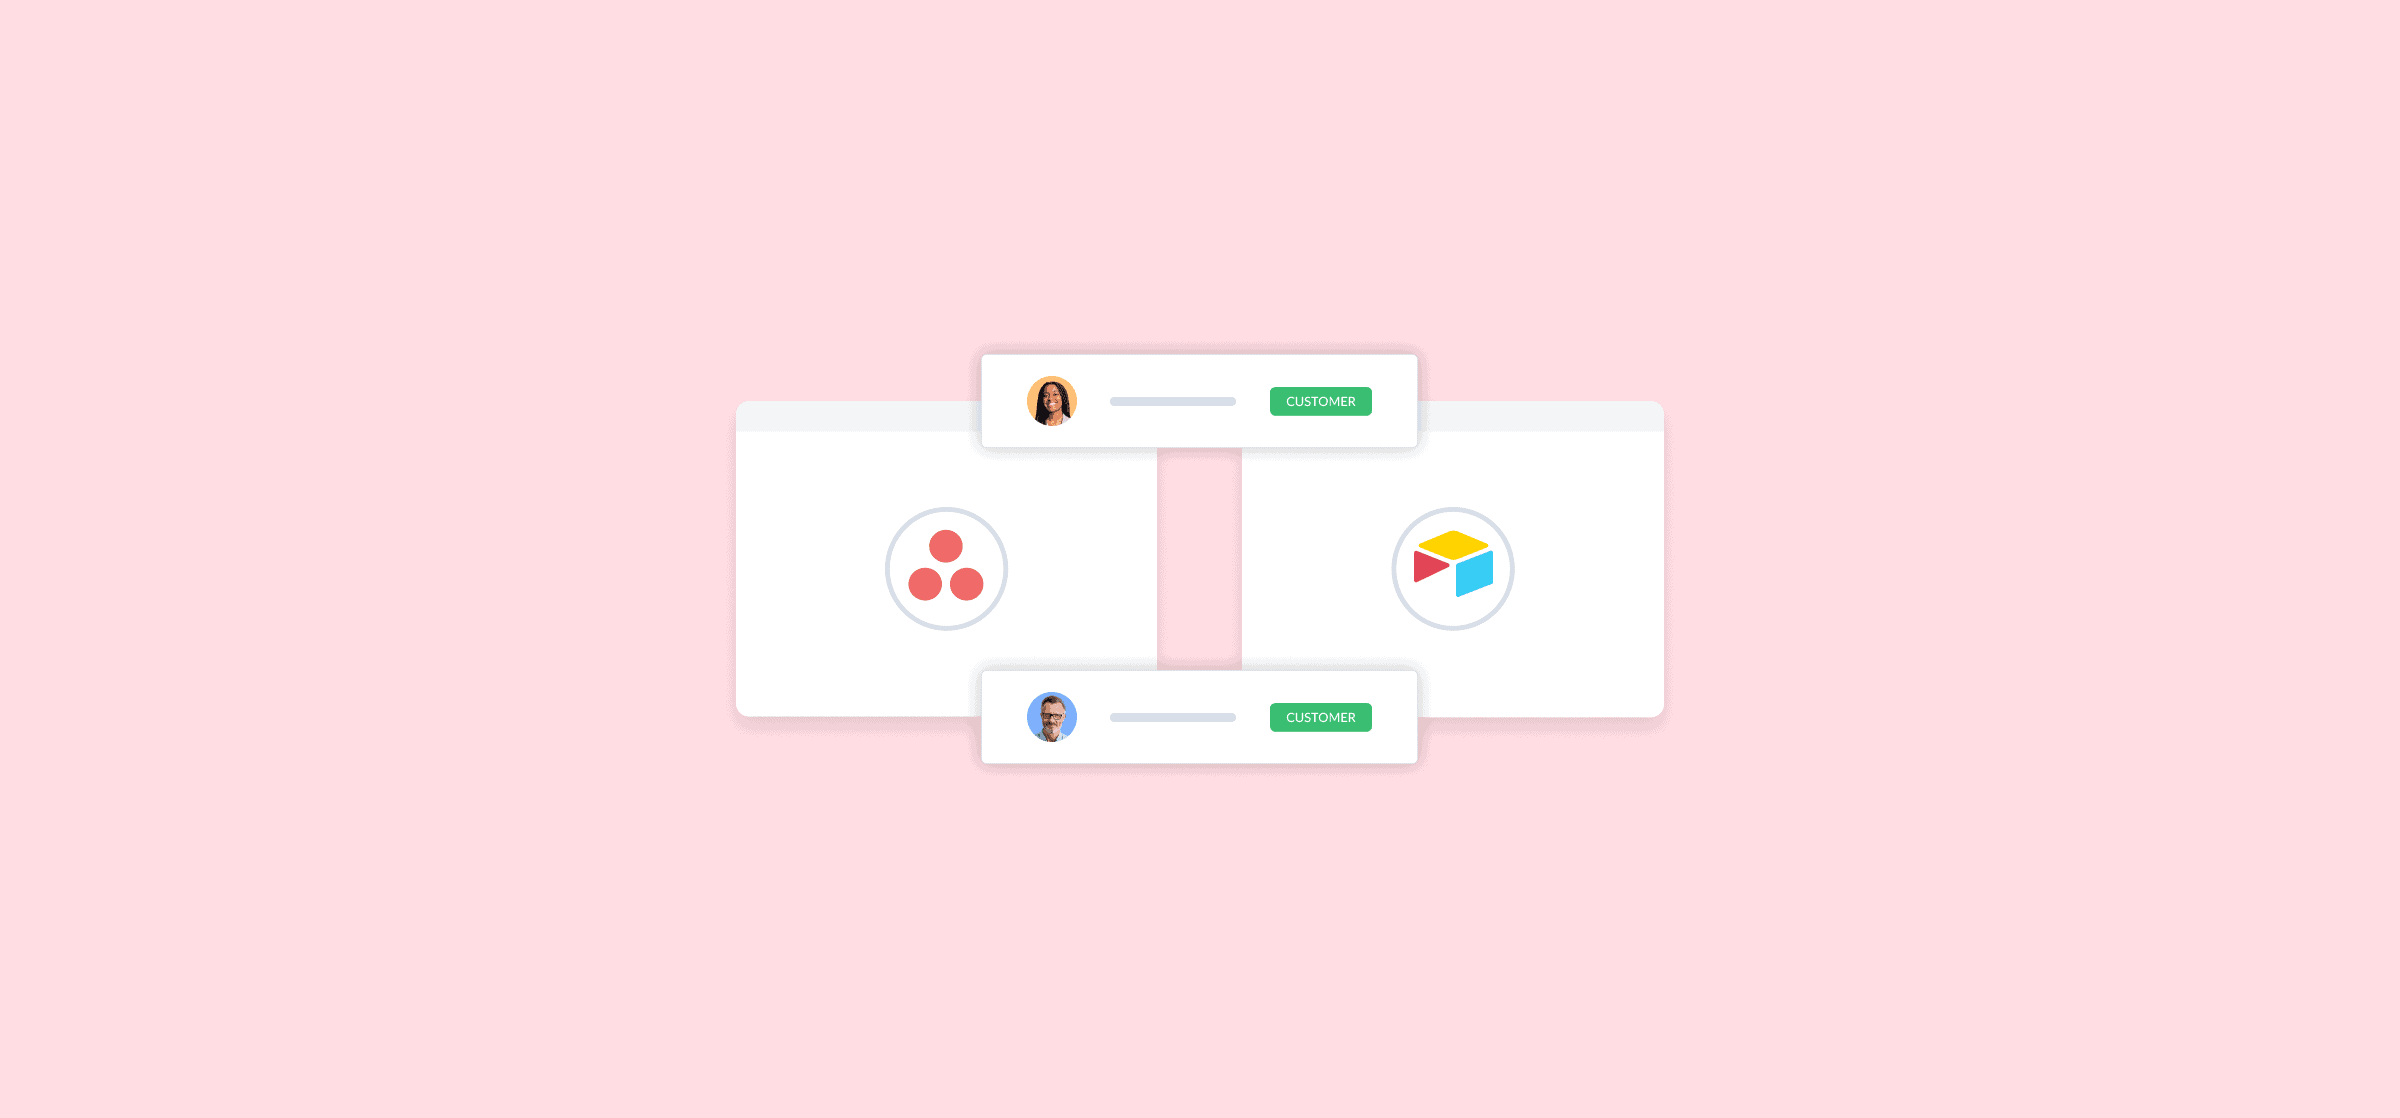 Logos for Asana and Airtable on a pink background.